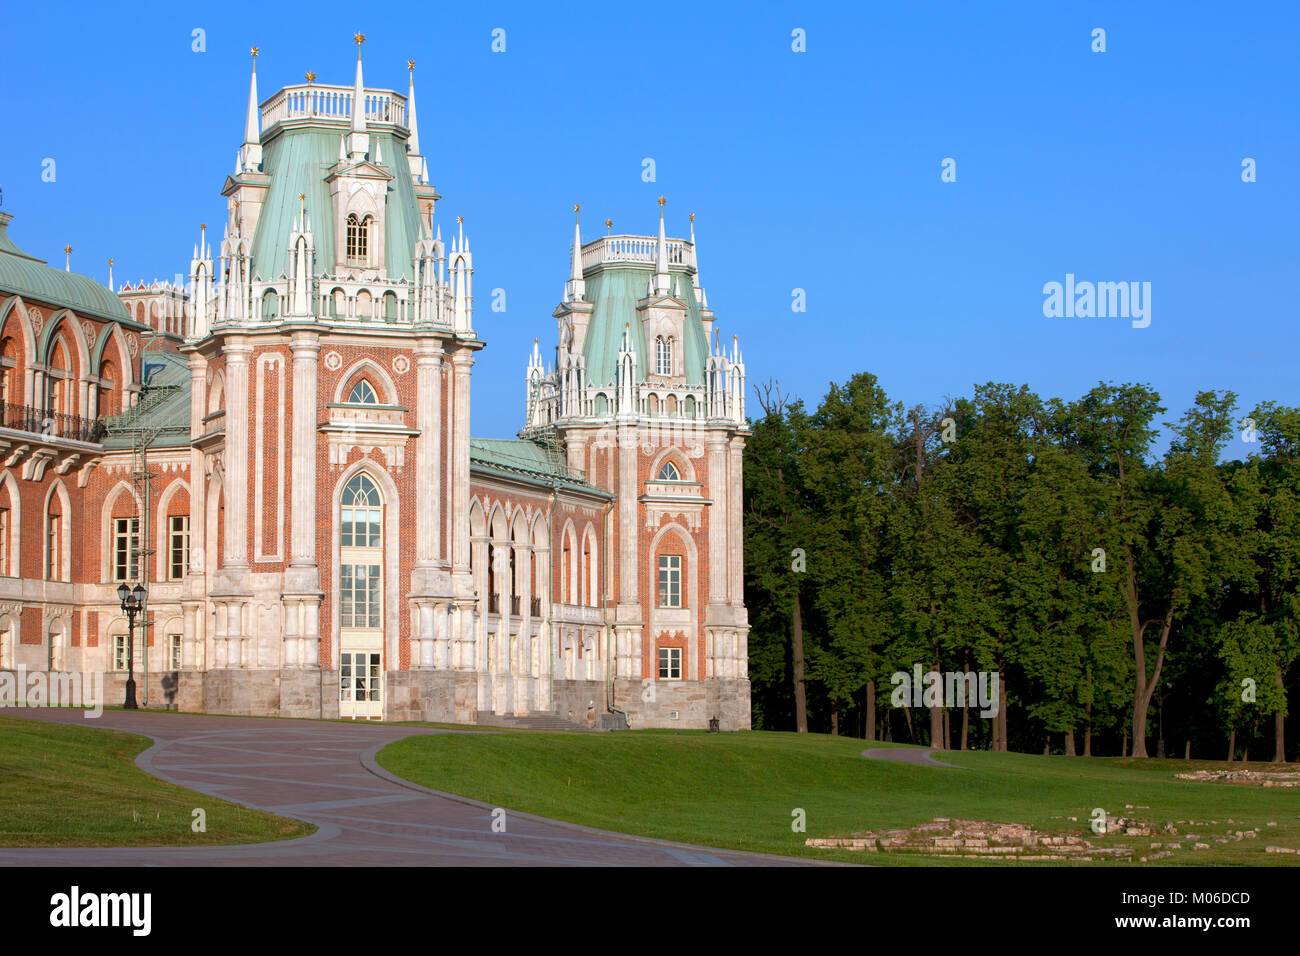 The West wing of the 18th century Neo-Gothic (Gothic Revival) Tsaritsyno Palace in Moscow, Russia Stock Photo